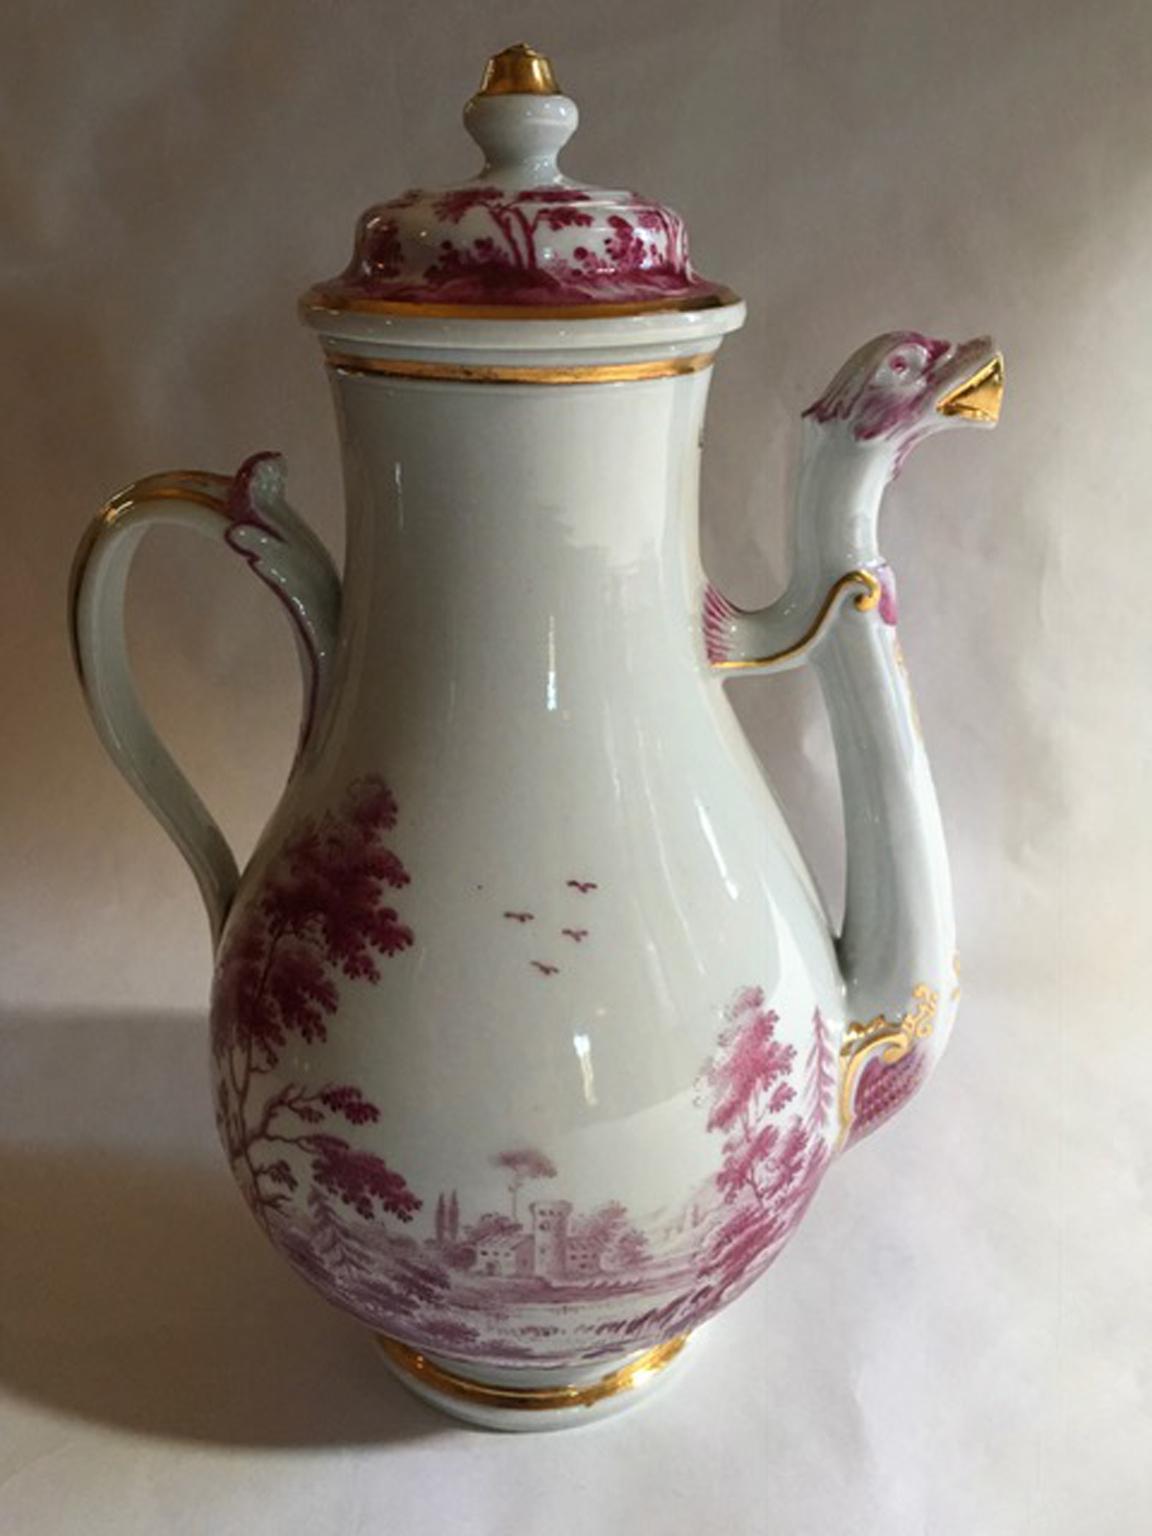 Richard Ginori Mid-19th Century porcelain tea pot with landscapes drawings in pink, hand made in Italy.

This handmade tea pot in fine porcelain was made by Richard Ginori, in Doccia, Italy.
The piece is hand painted in pink with landscapes so rich